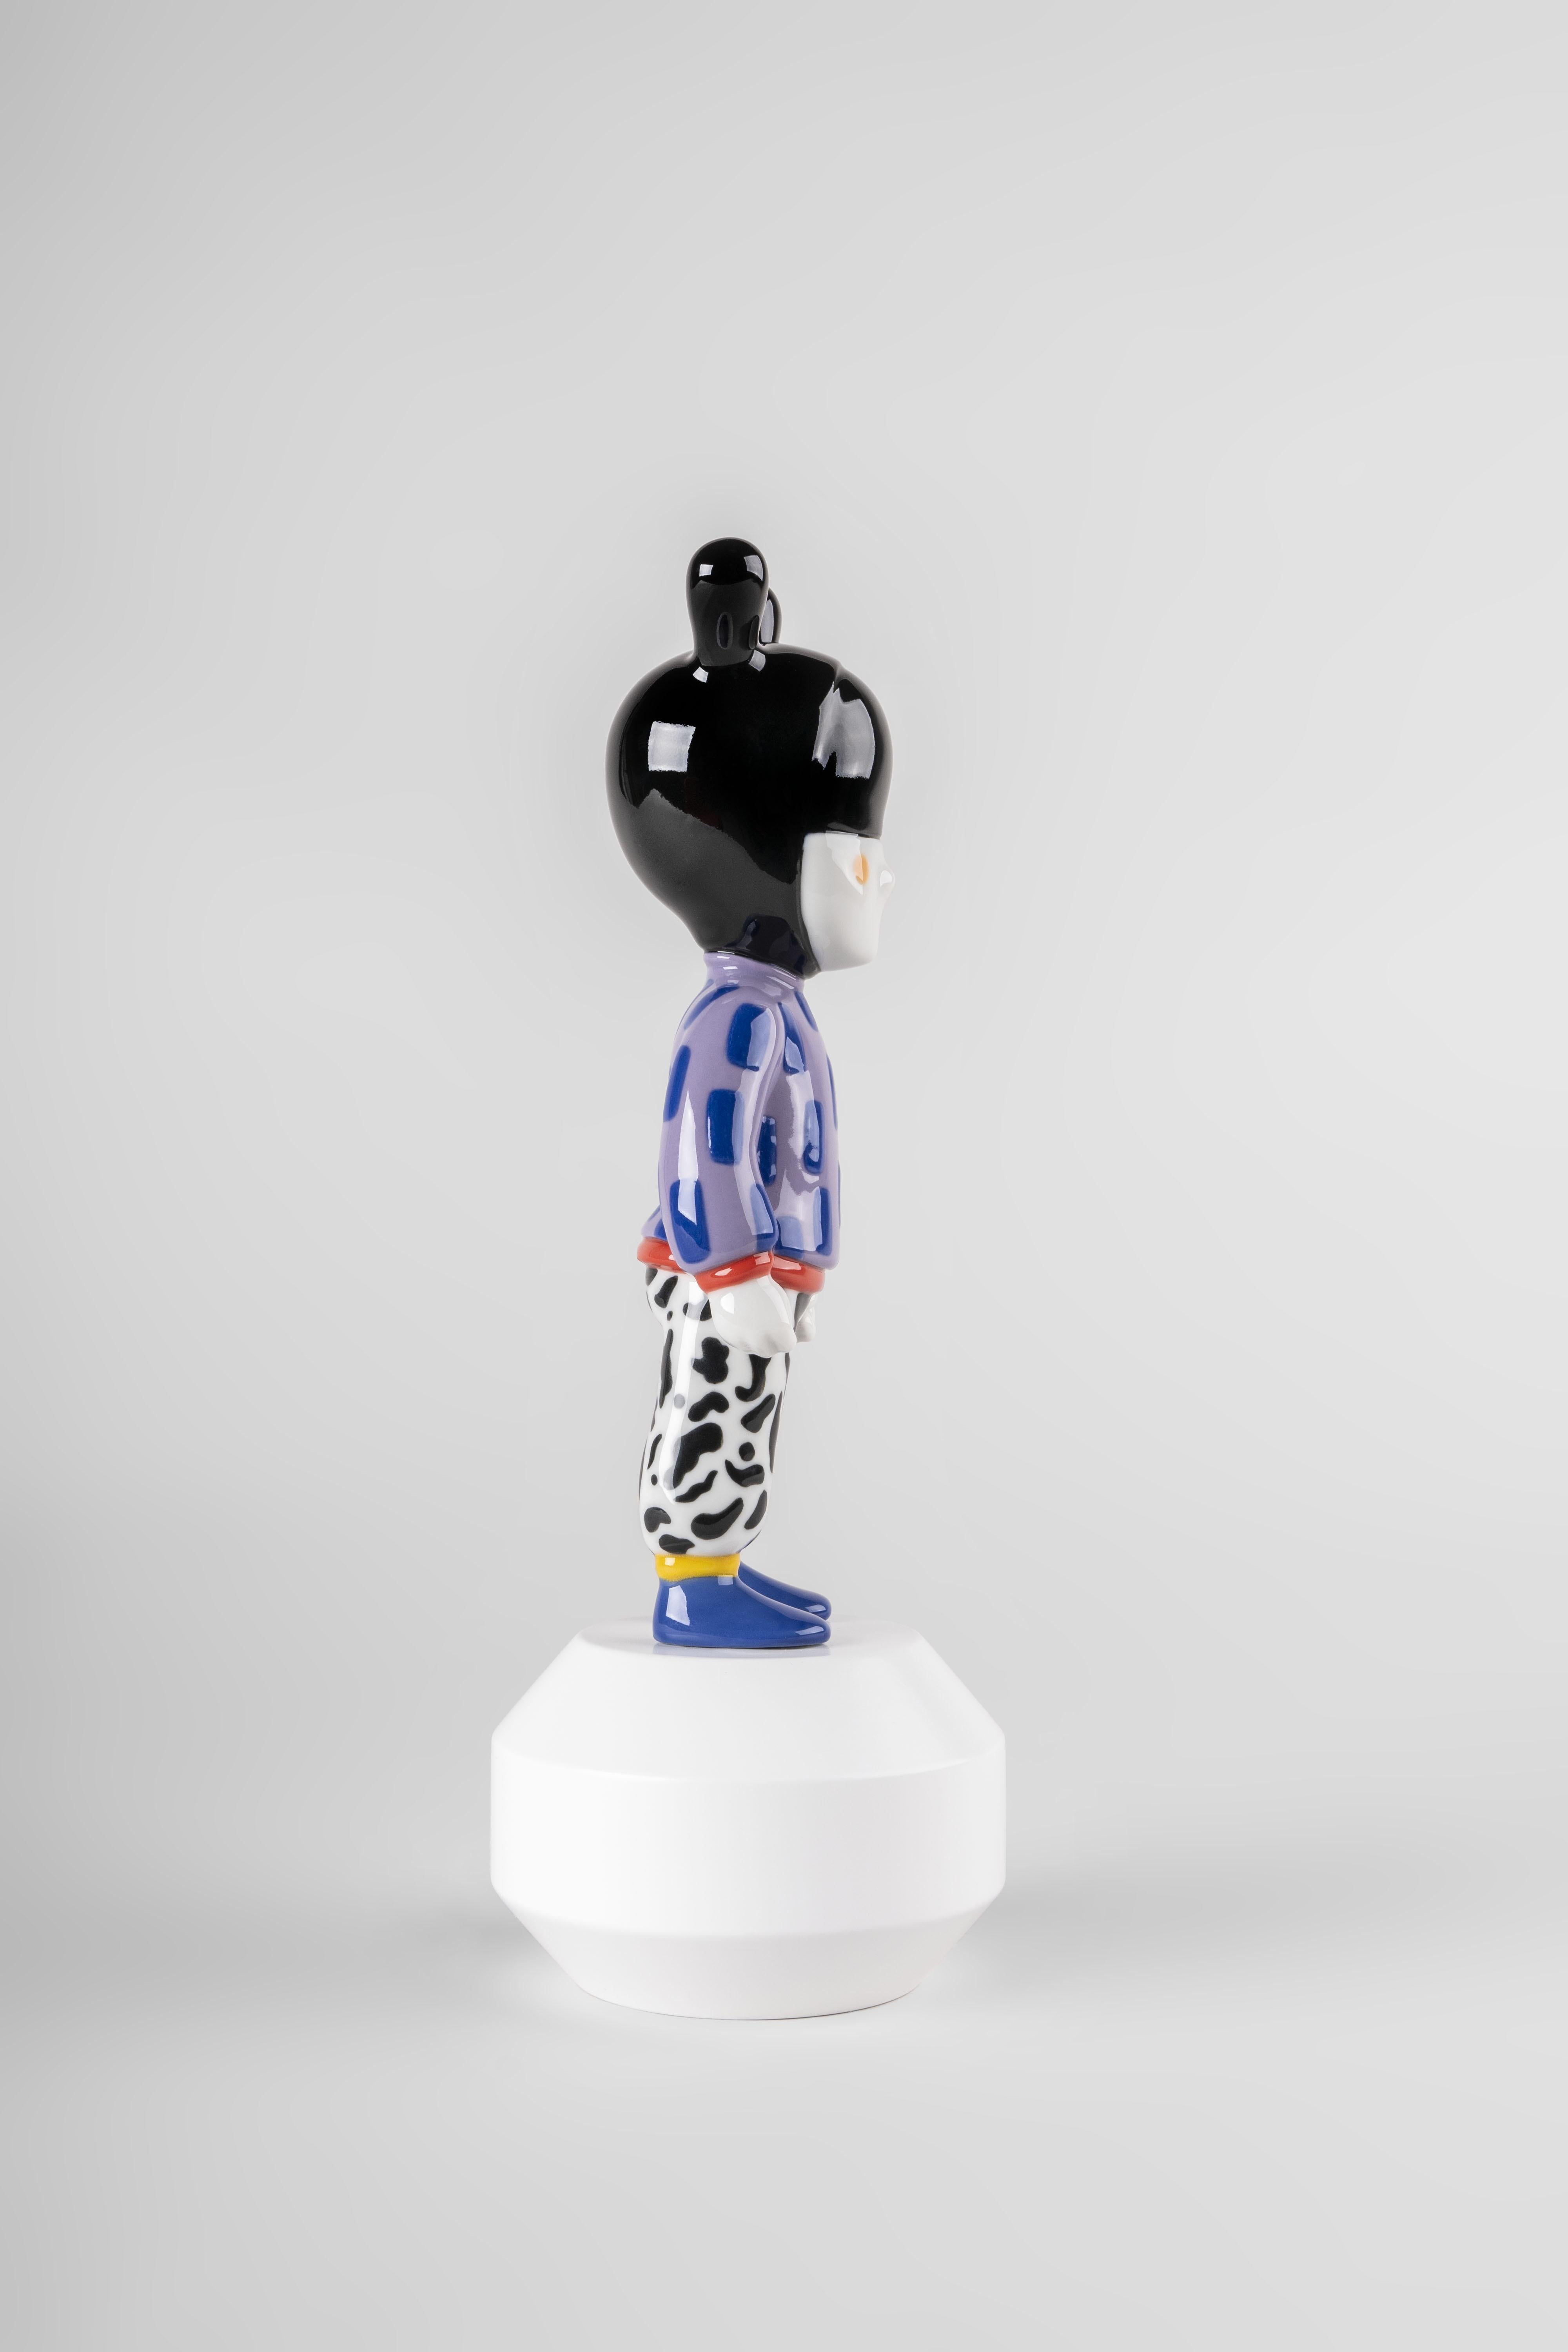 Hand-Crafted The Guest by Camille Walala - Little Sculpture. Numbered edition For Sale